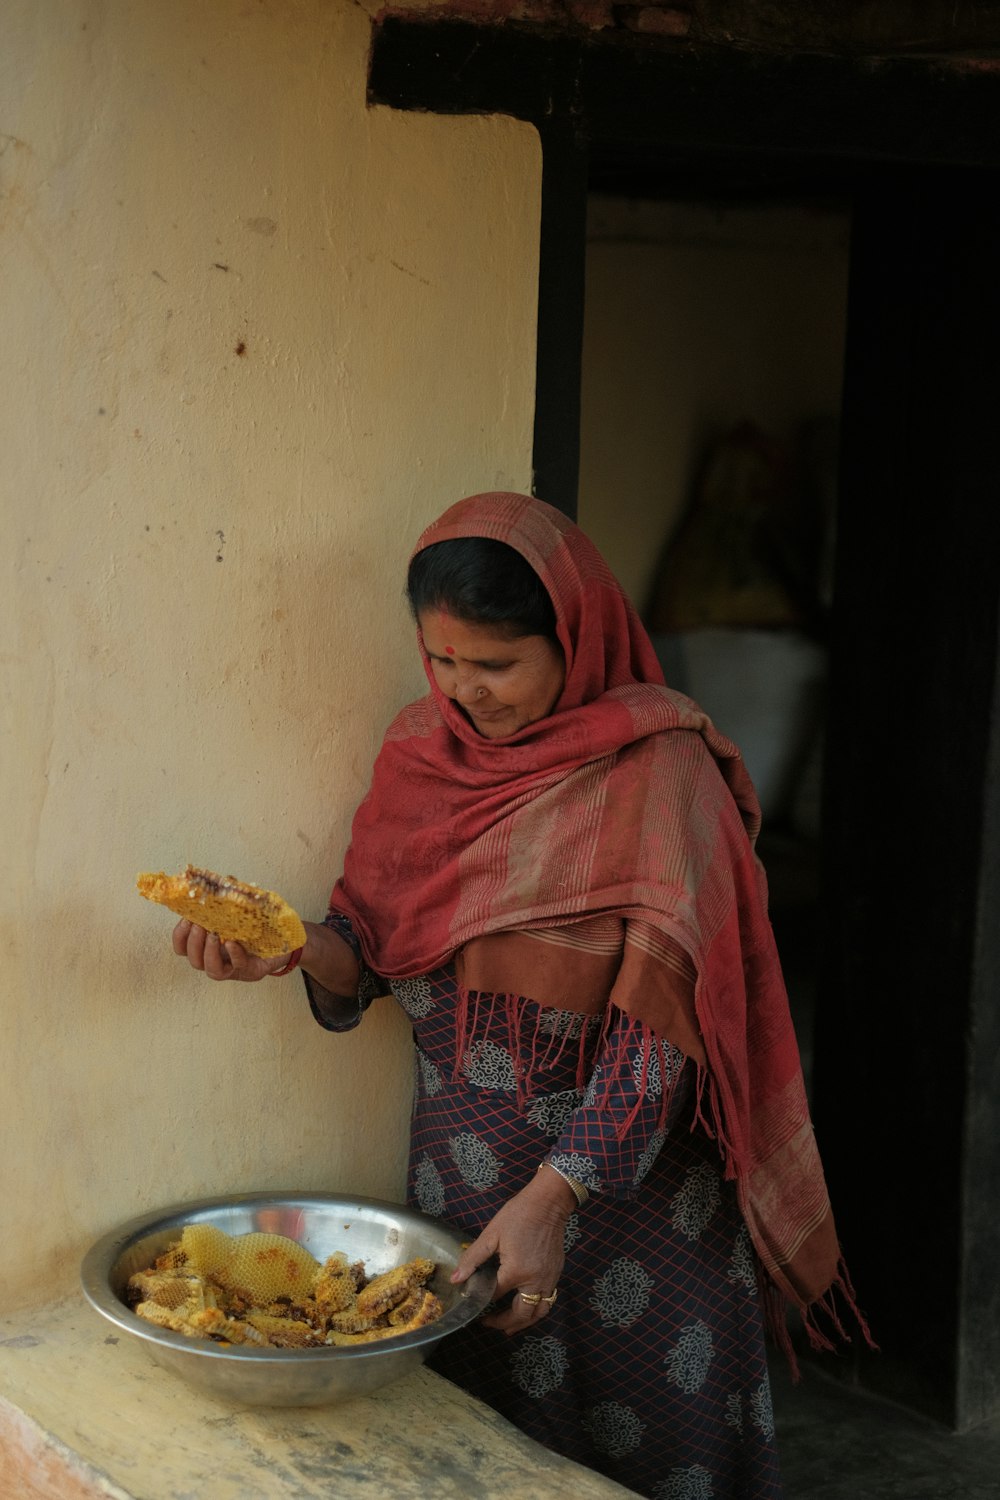 a person in a red head scarf holding a plate of food